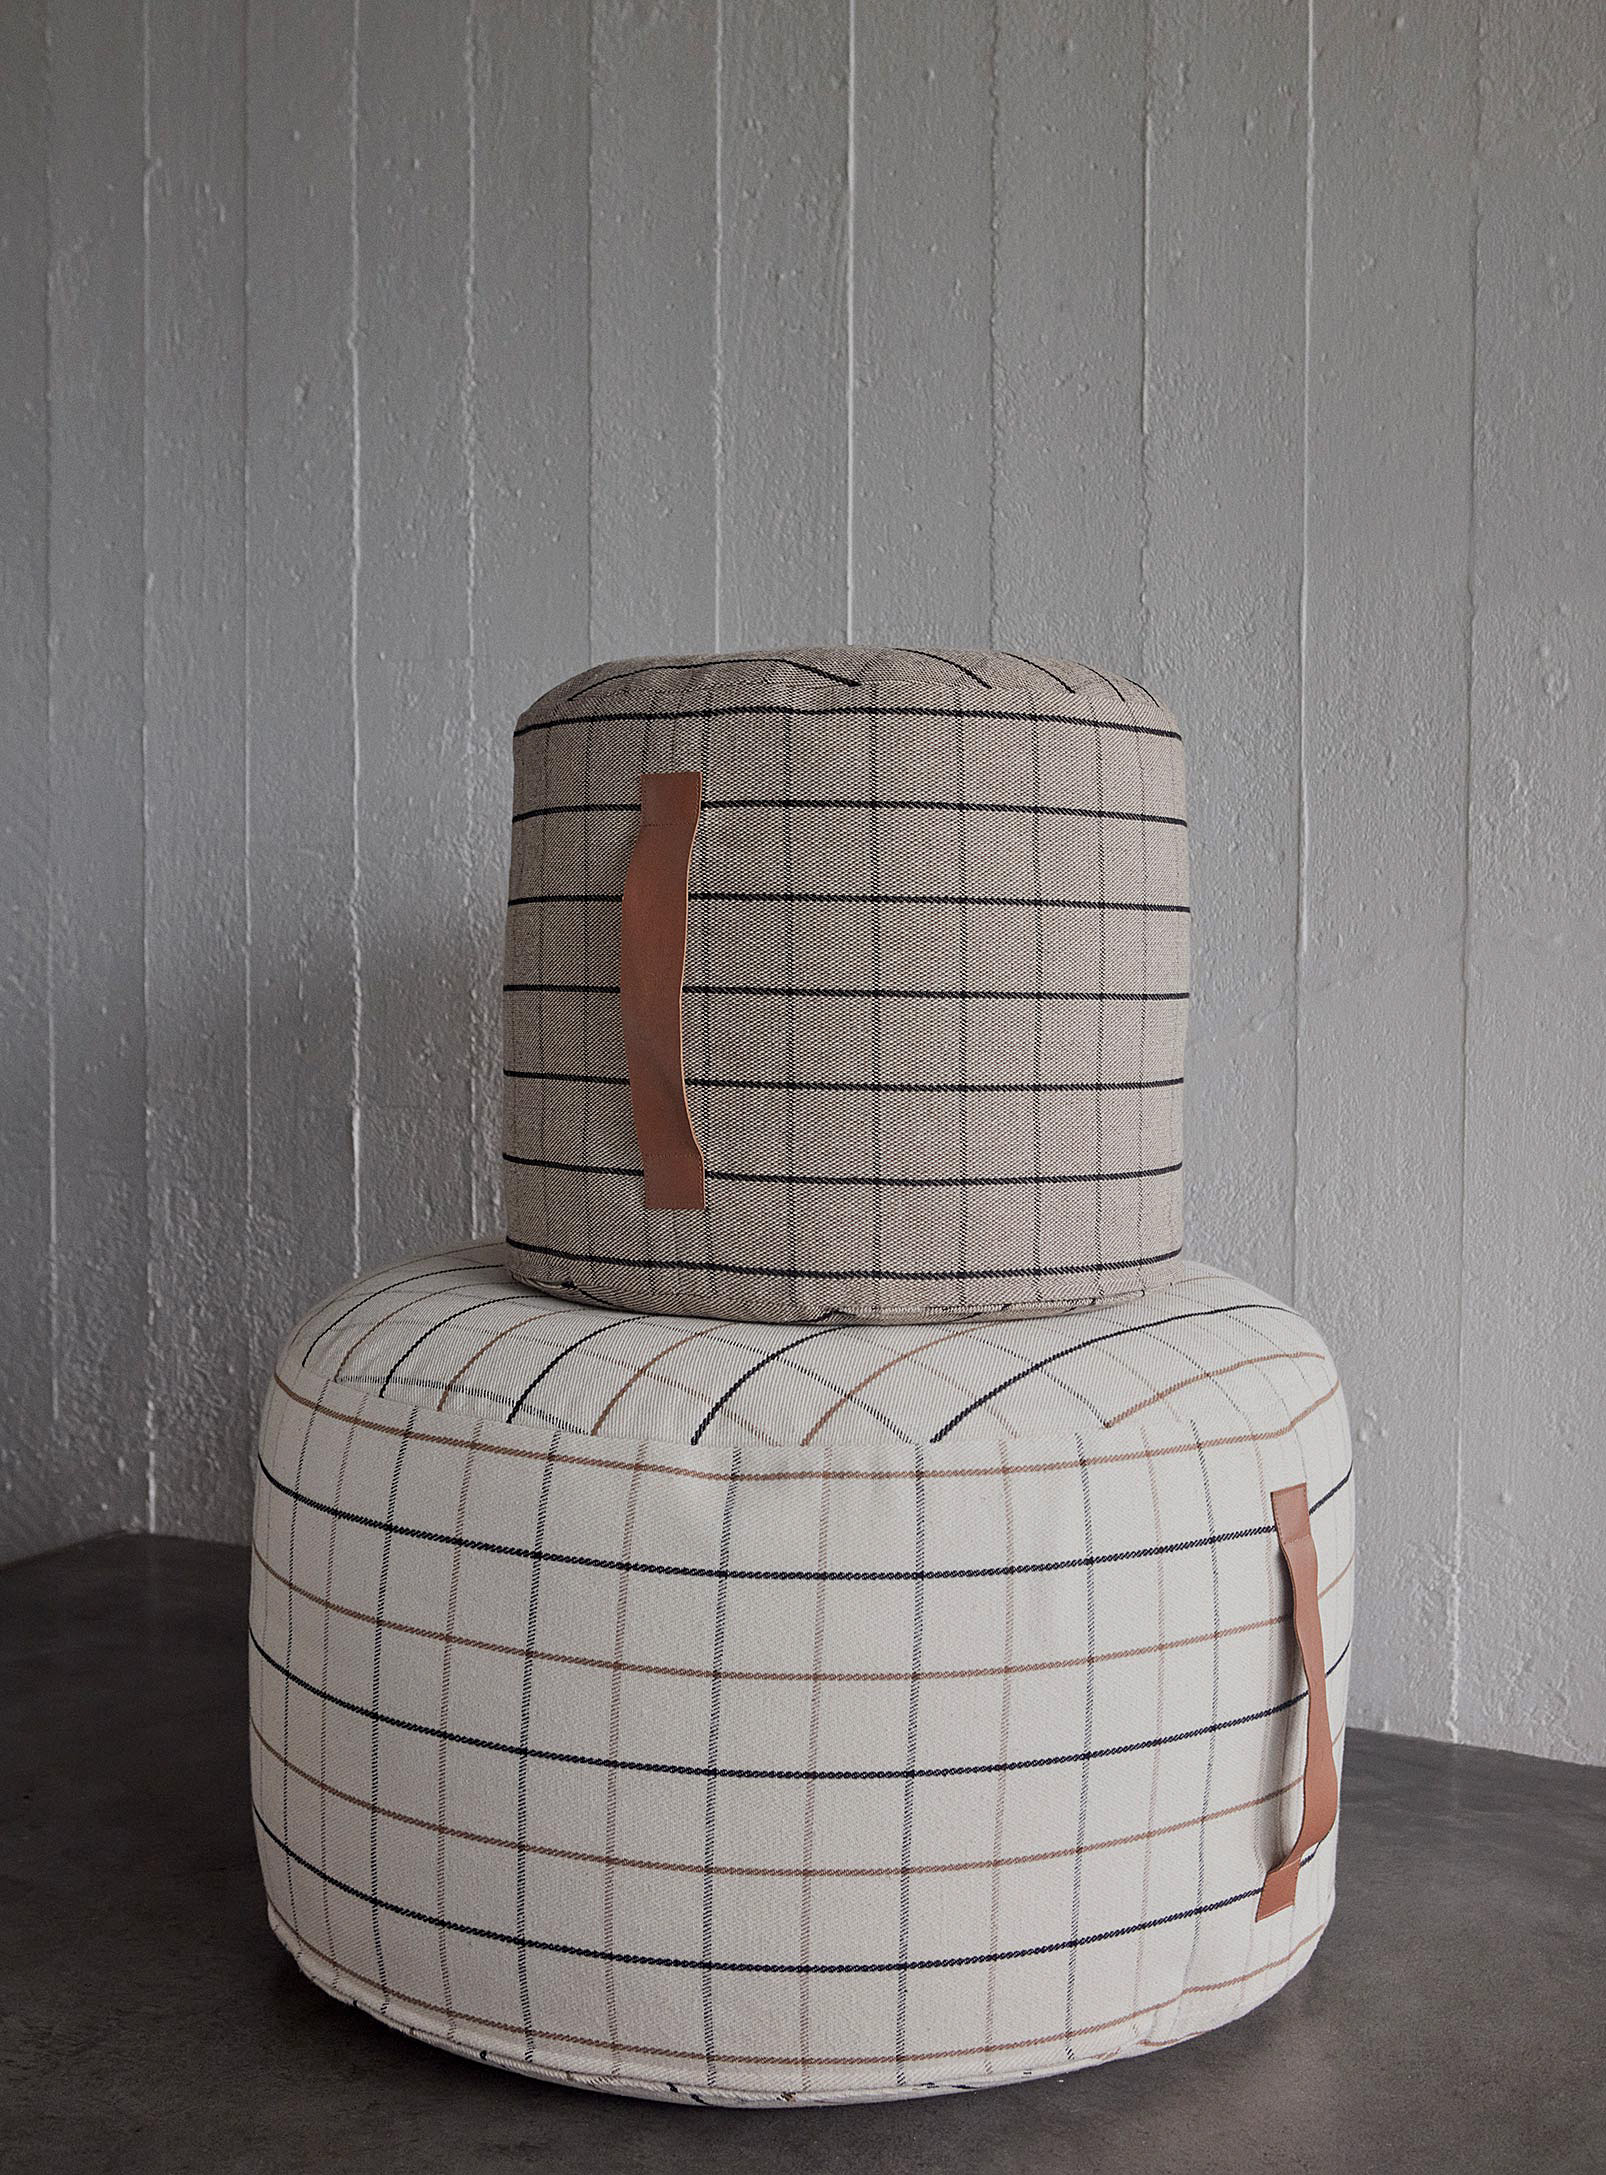 Oyoy Living Design Nuanced Checkers Round Pouf See Available Sizes In Cream Beige